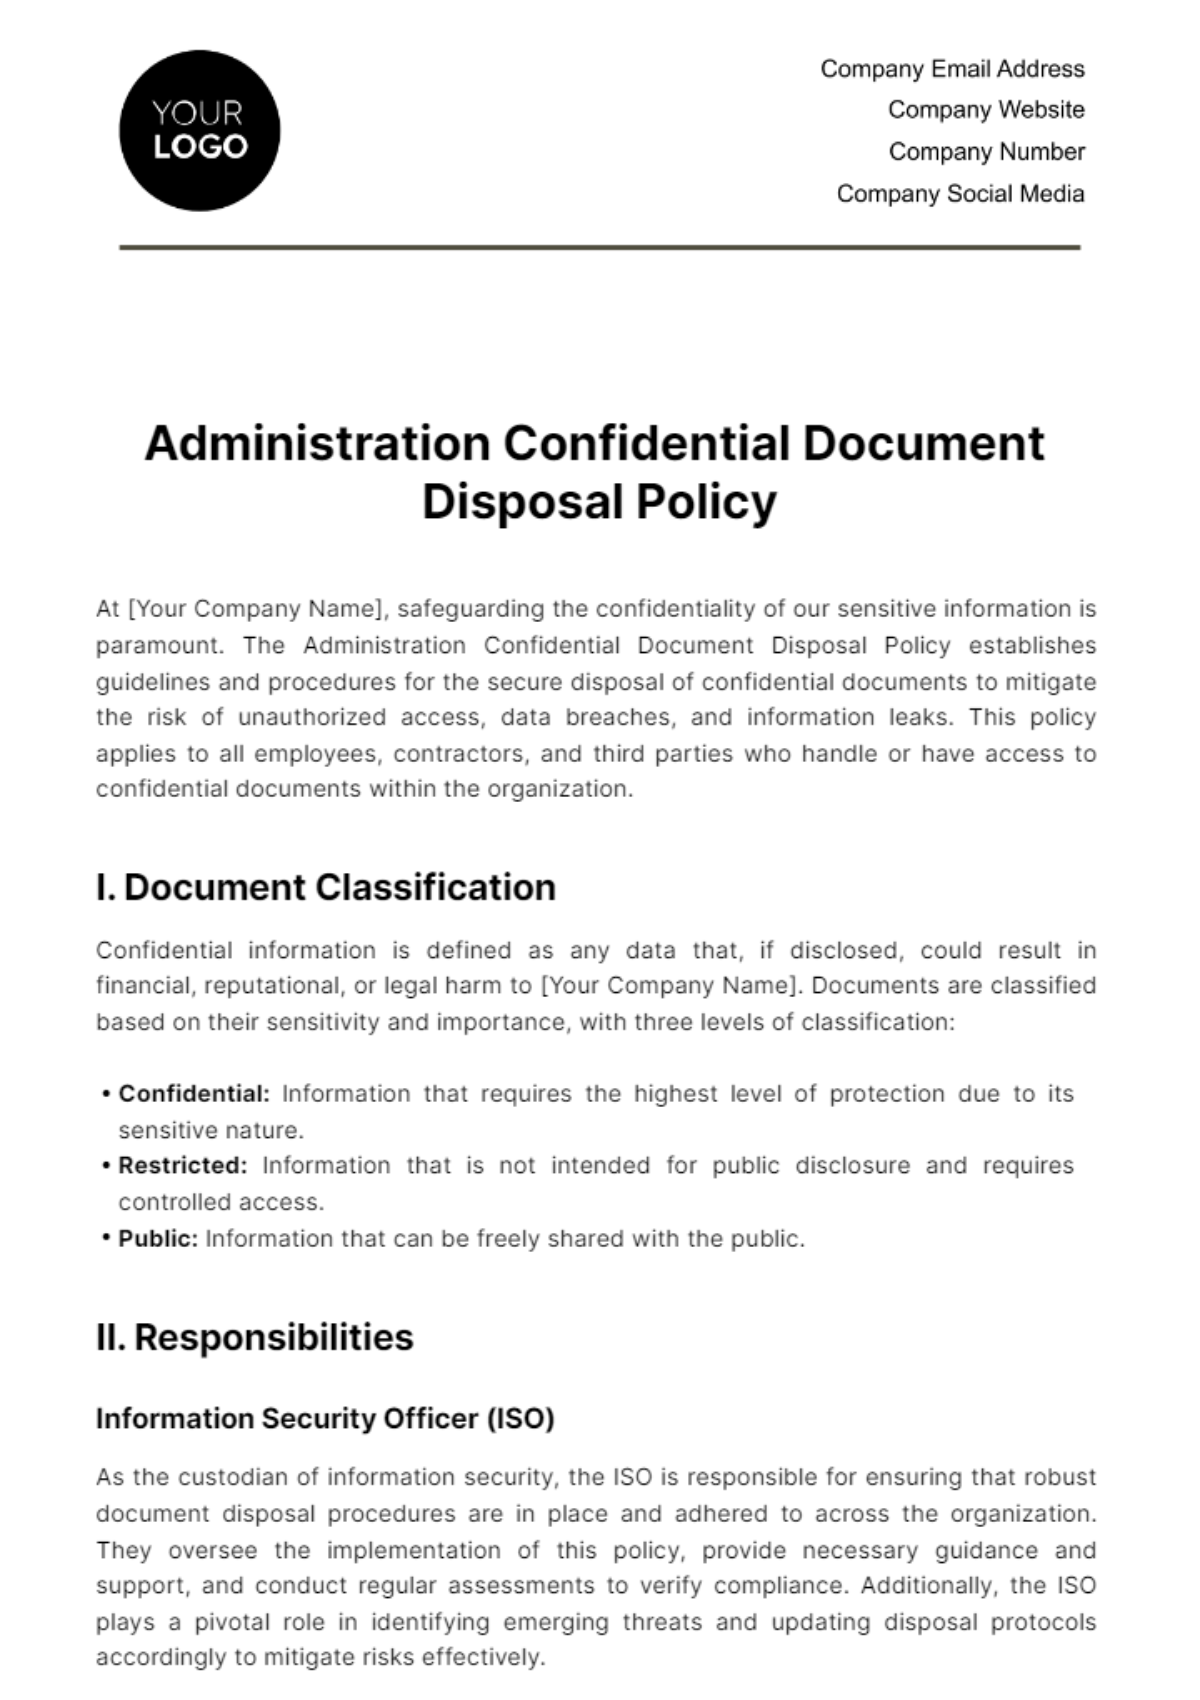 Free Administration Confidential Document Disposal Policy Template